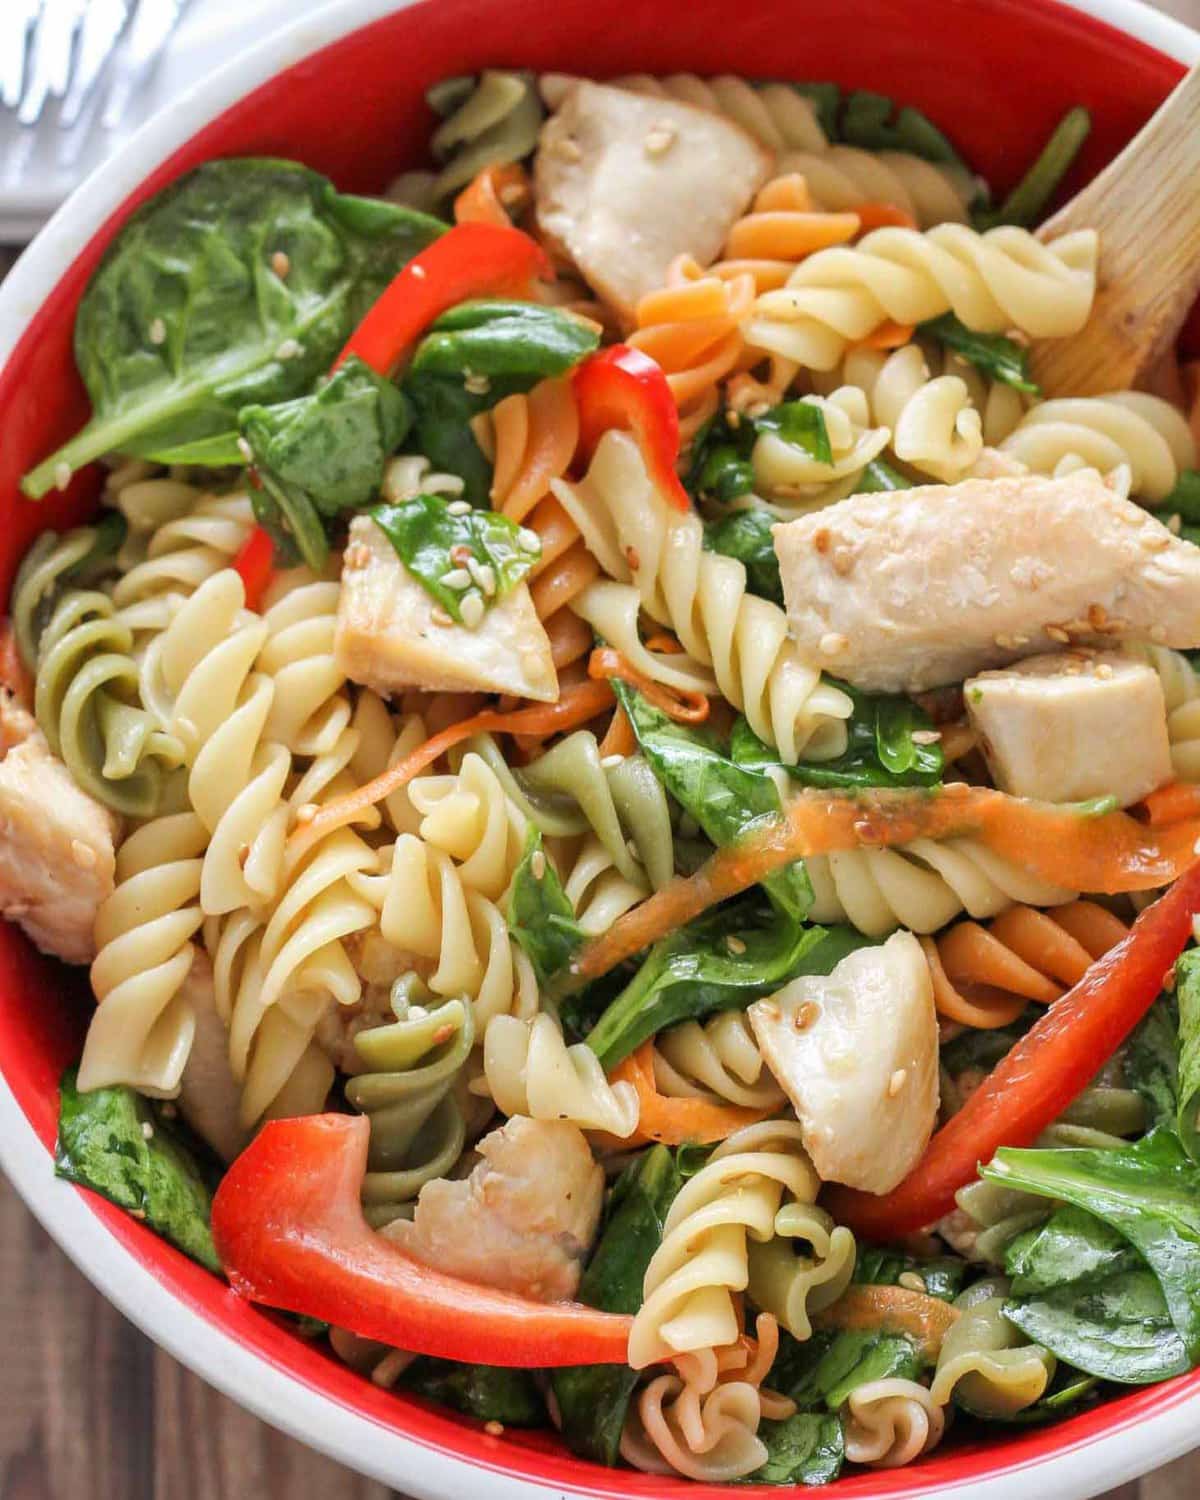 Asian Pasta salad topped with veggies in a white and red bowl